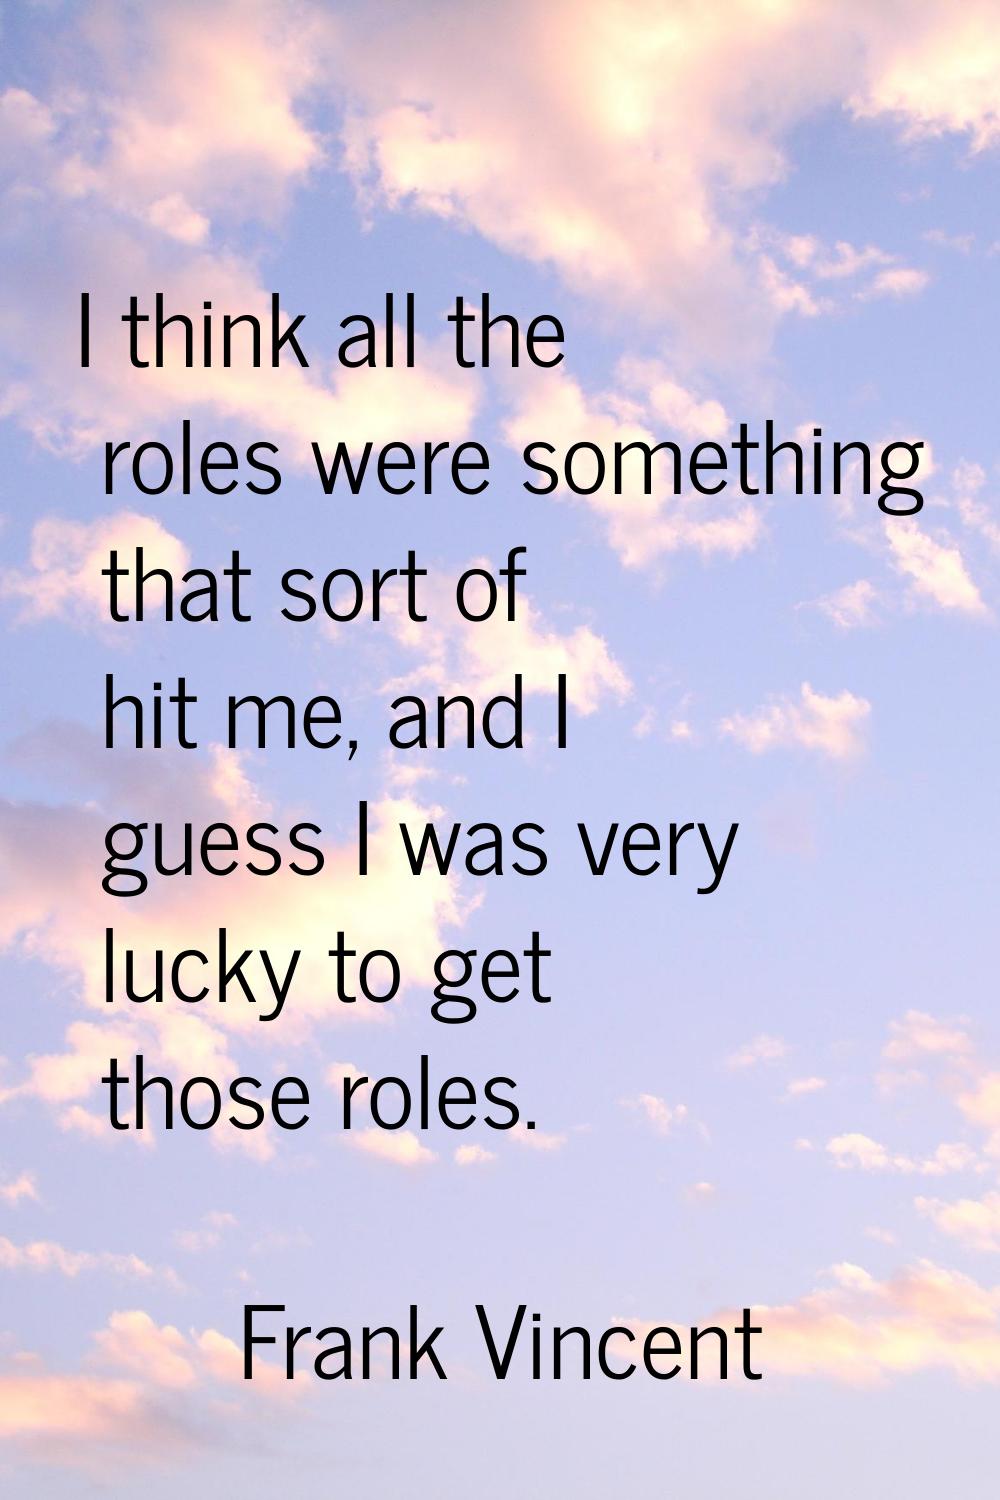 I think all the roles were something that sort of hit me, and I guess I was very lucky to get those